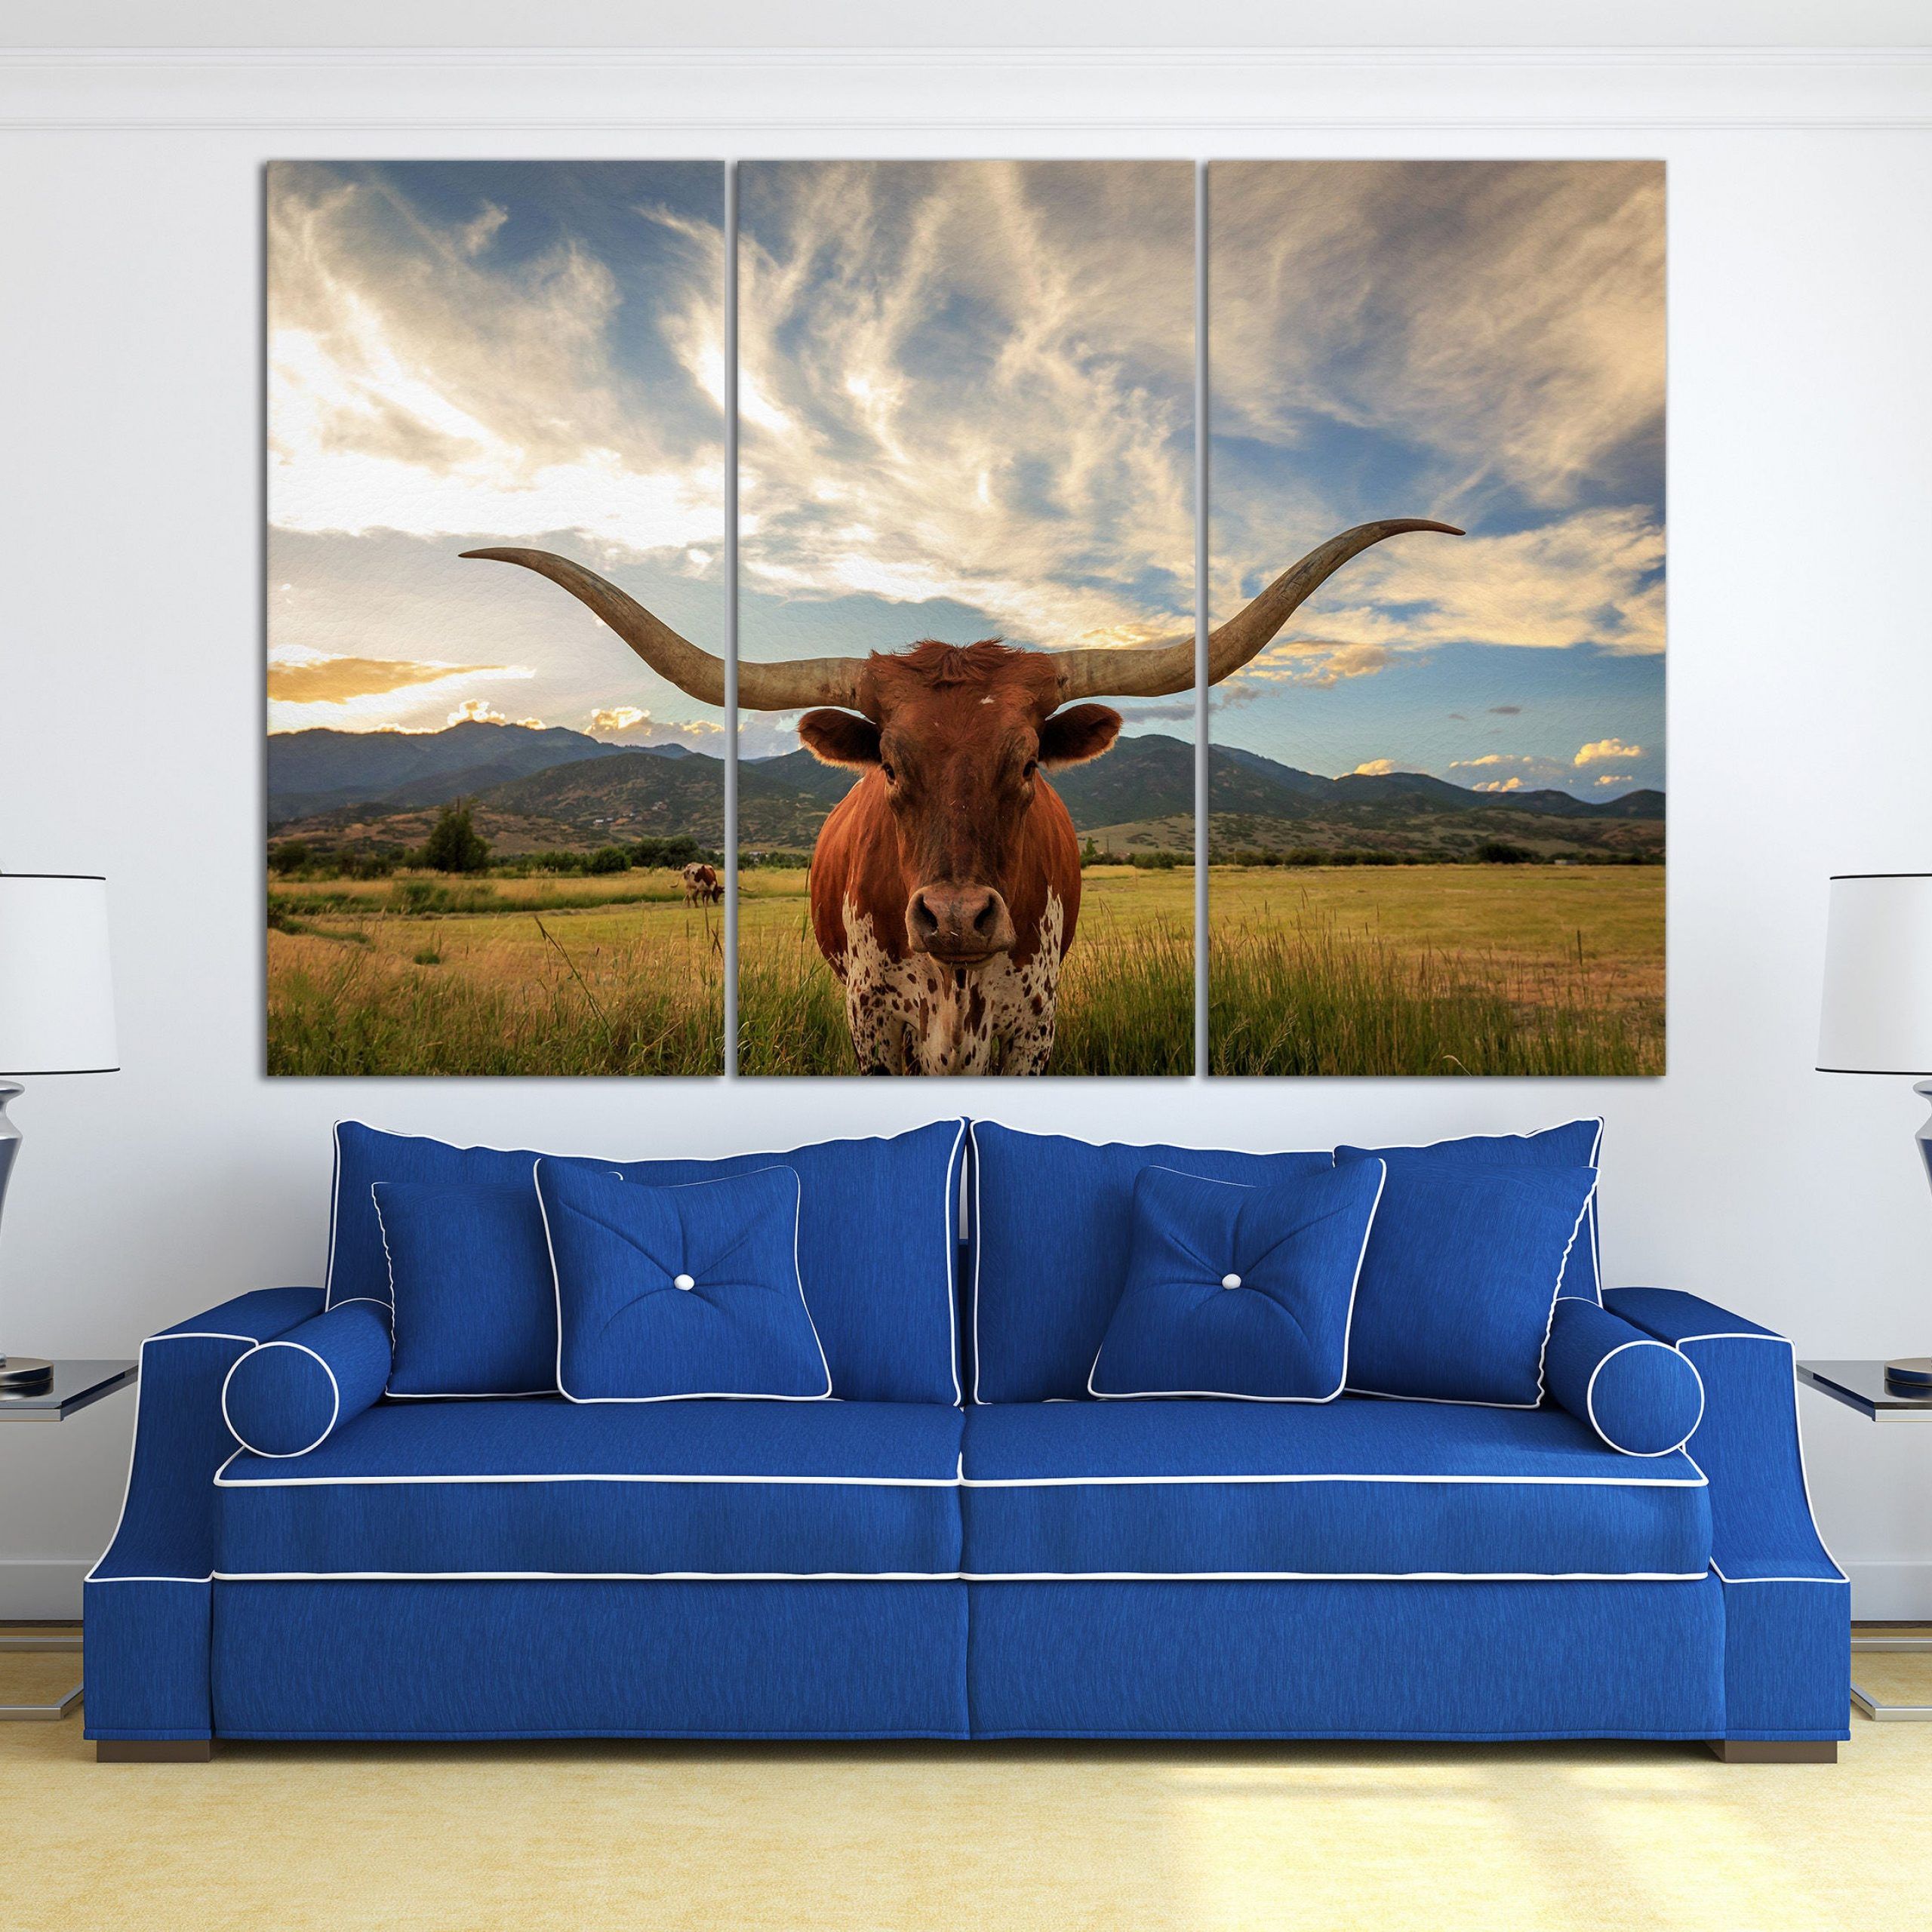 Texas Longhorn Steer Canvas Wall Art Intended For Long Horn Wall Art (View 15 of 15)